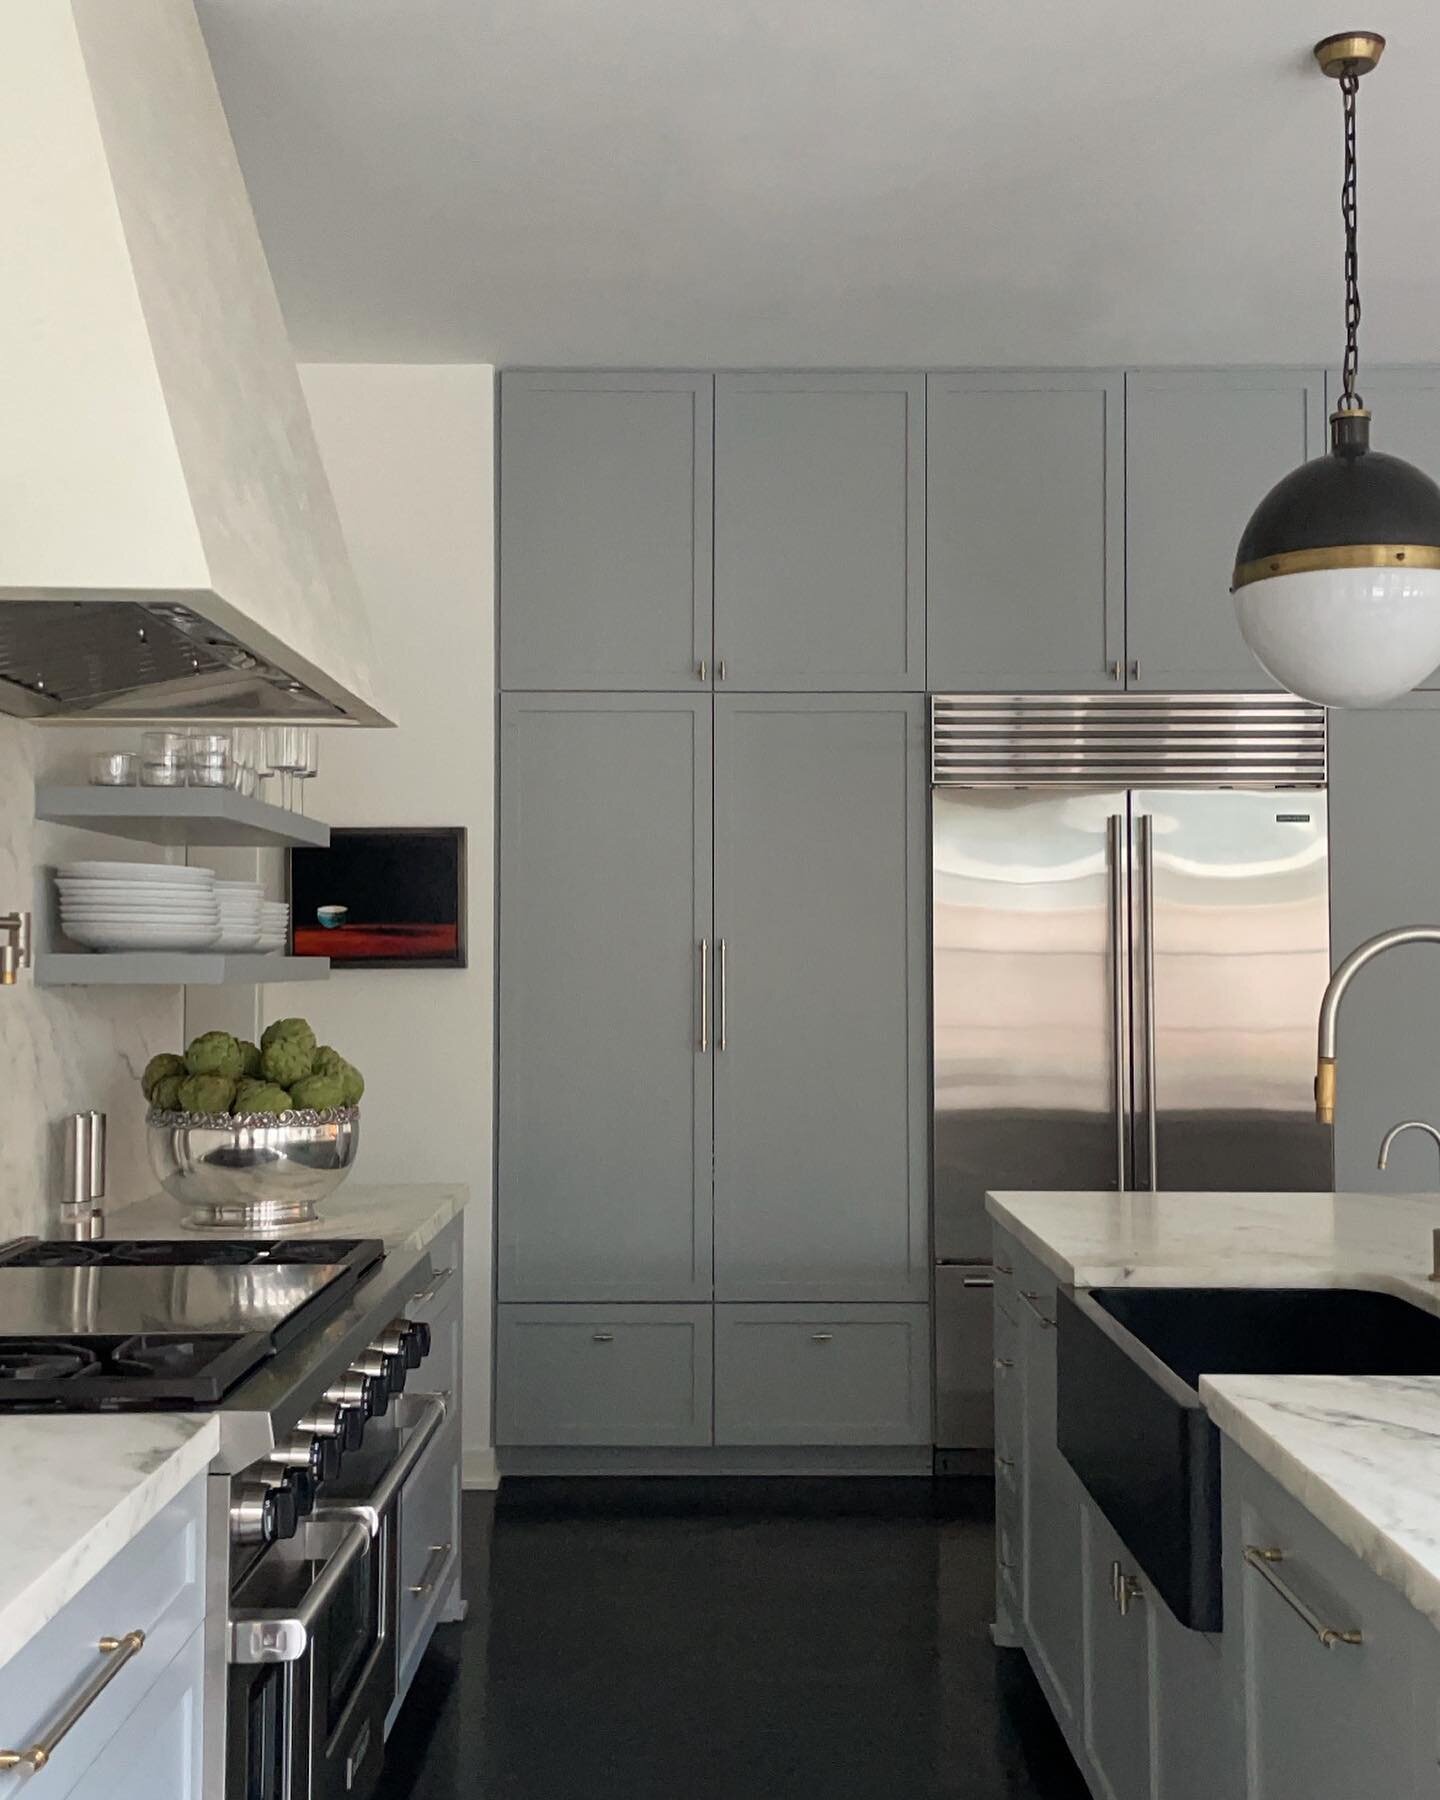 Let the weekend begin&hellip;A calming kitchen space I designed for my mom in Houston - featuring foggy blue cabinetry, danby montclair marble countertops, a plastered hood and a custom black granite apron-front sink. 

.
.
.
.

#kitchen #kitchendesi